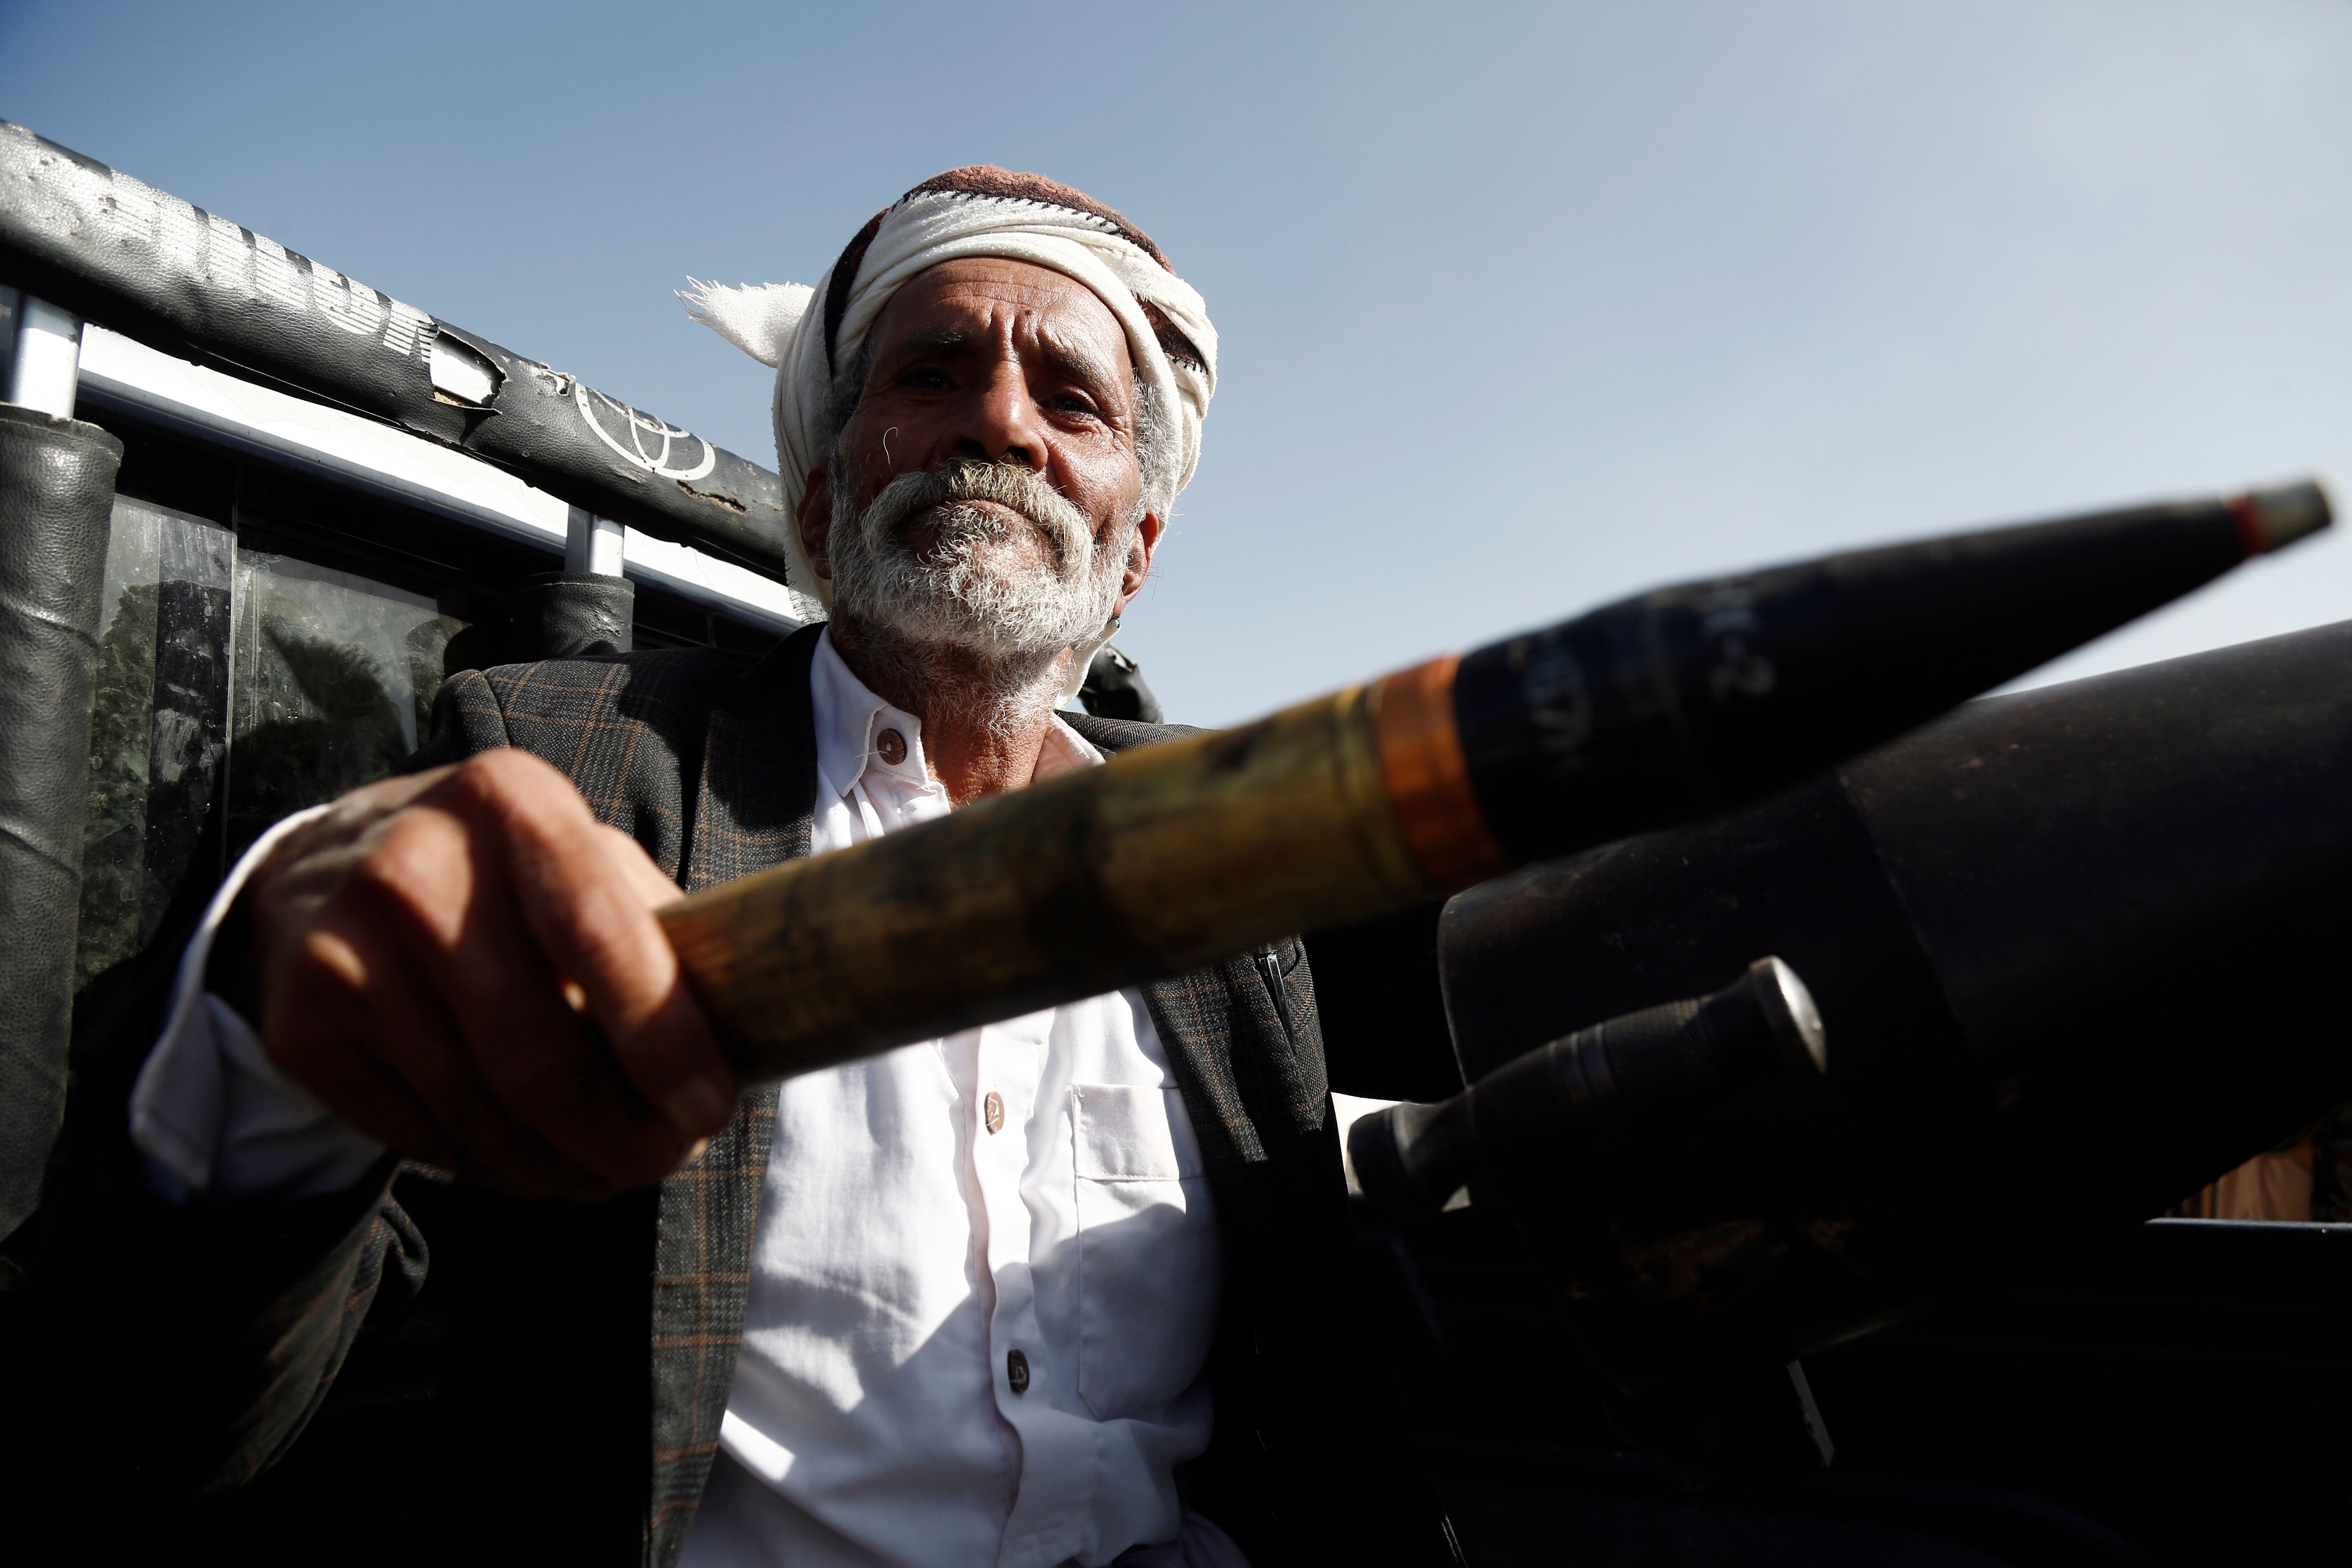 An elderly Houthi fighter mans a cannon mounted on a vehicle at a rally in support of Palestinians in the Gaza Strip